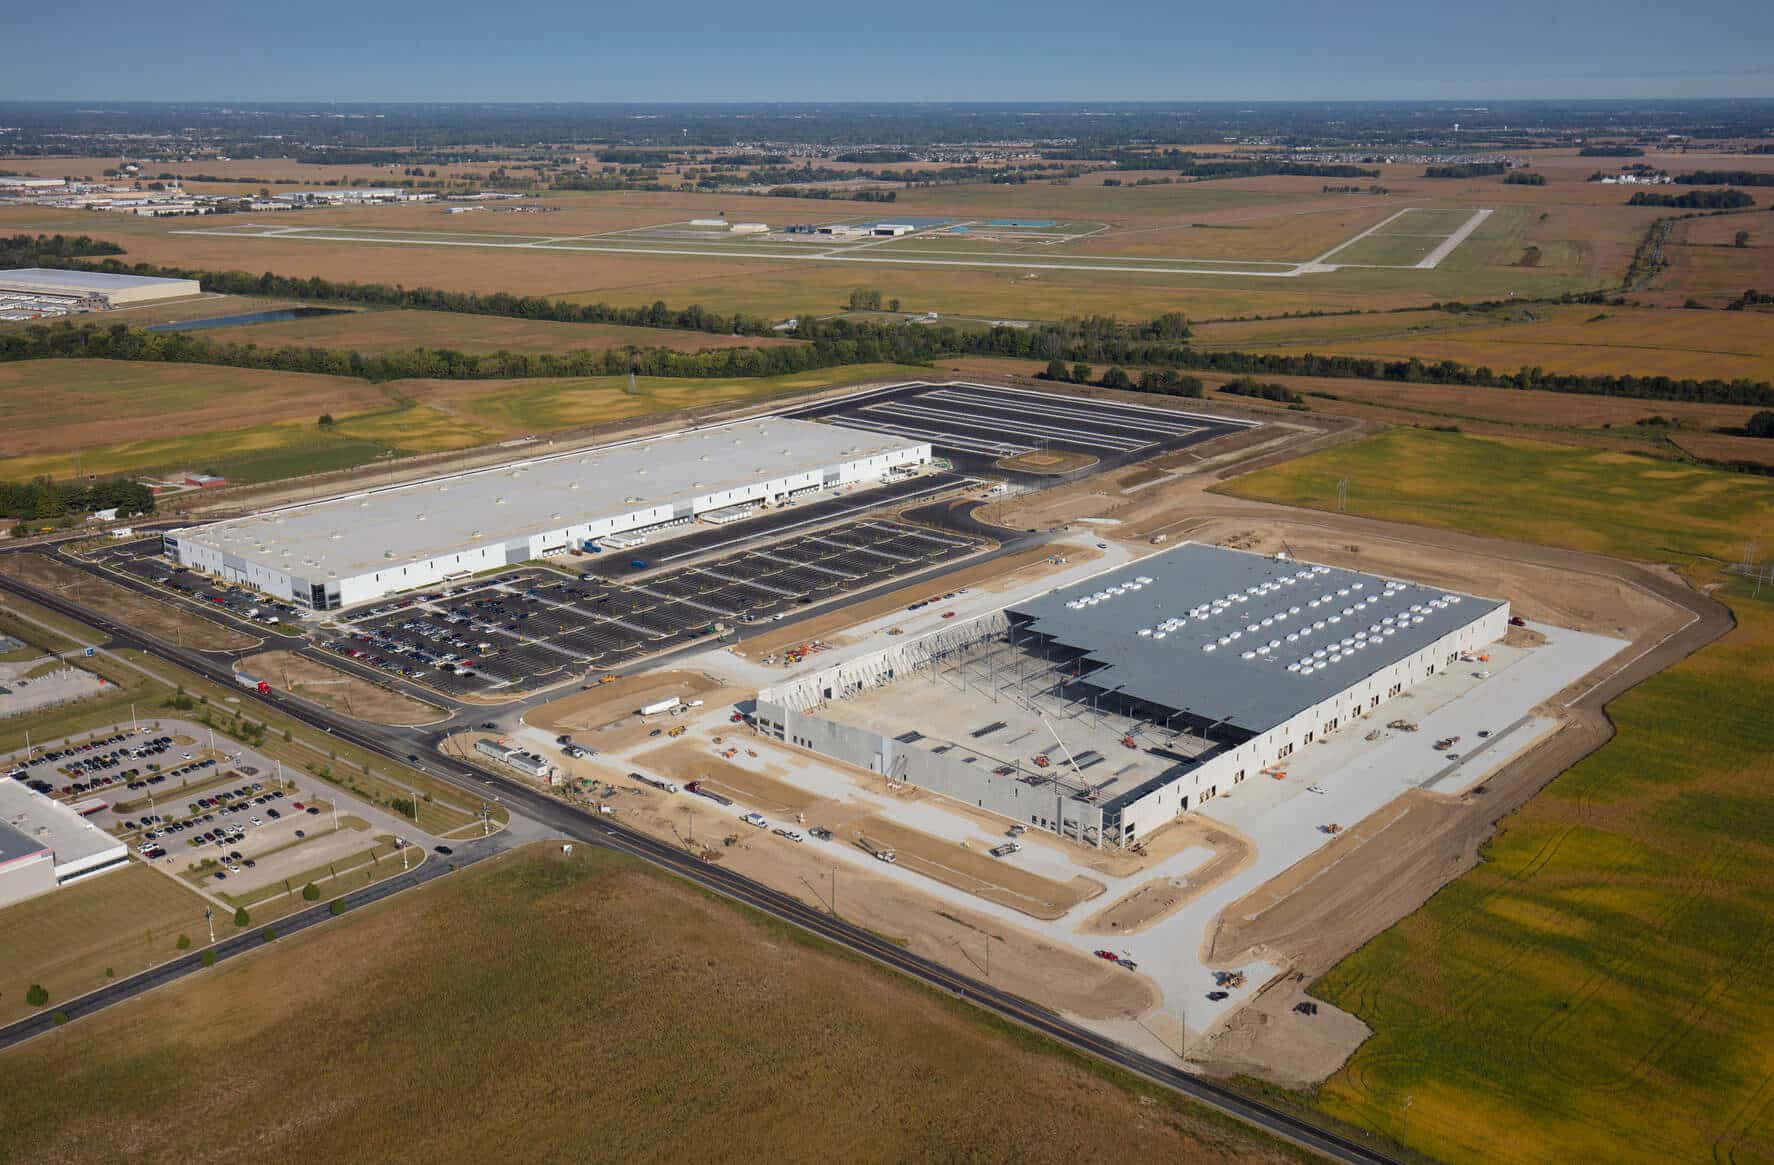 Aerial view of a completed and under construction industrial warehouse facility